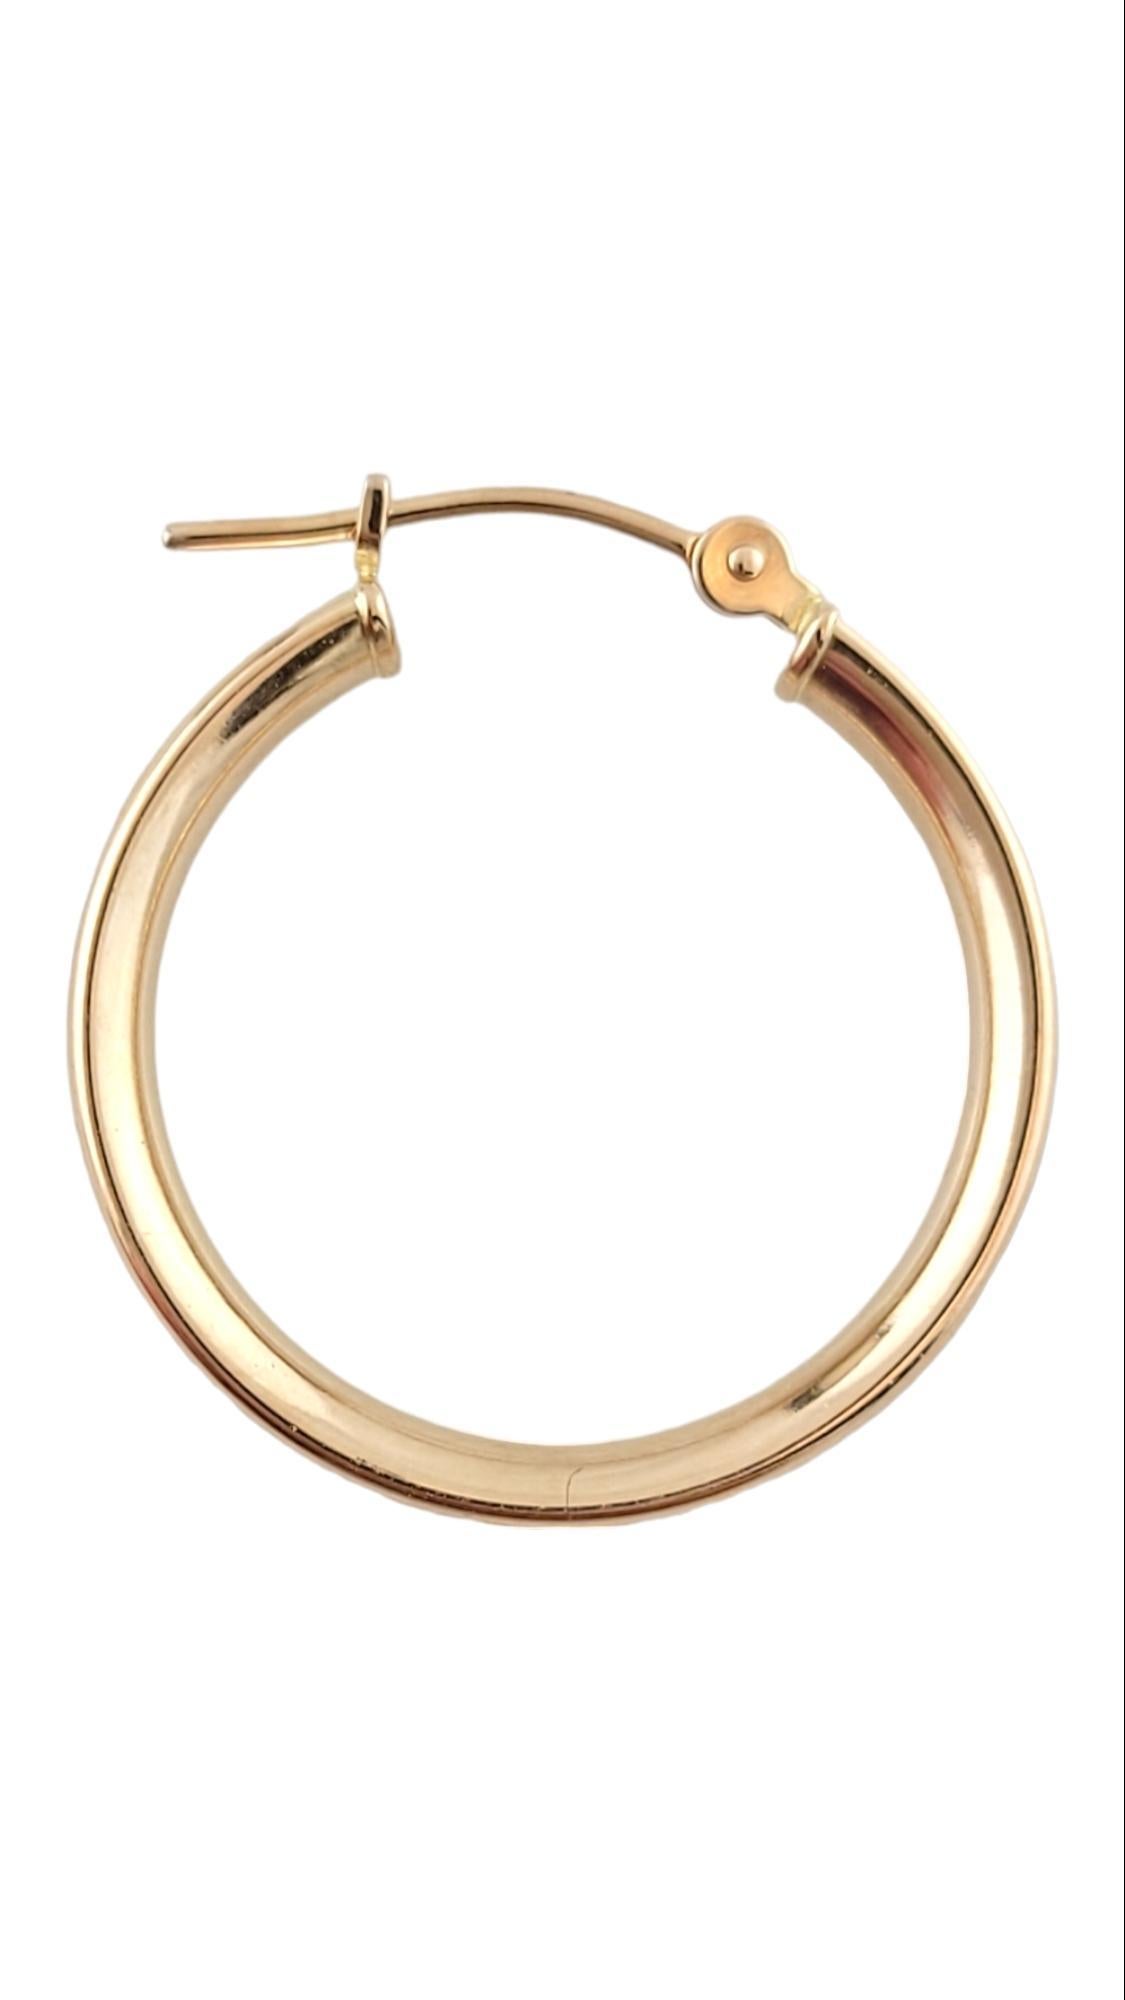 14K Yellow Gold Hoop Earrings #15901 In Good Condition For Sale In Washington Depot, CT